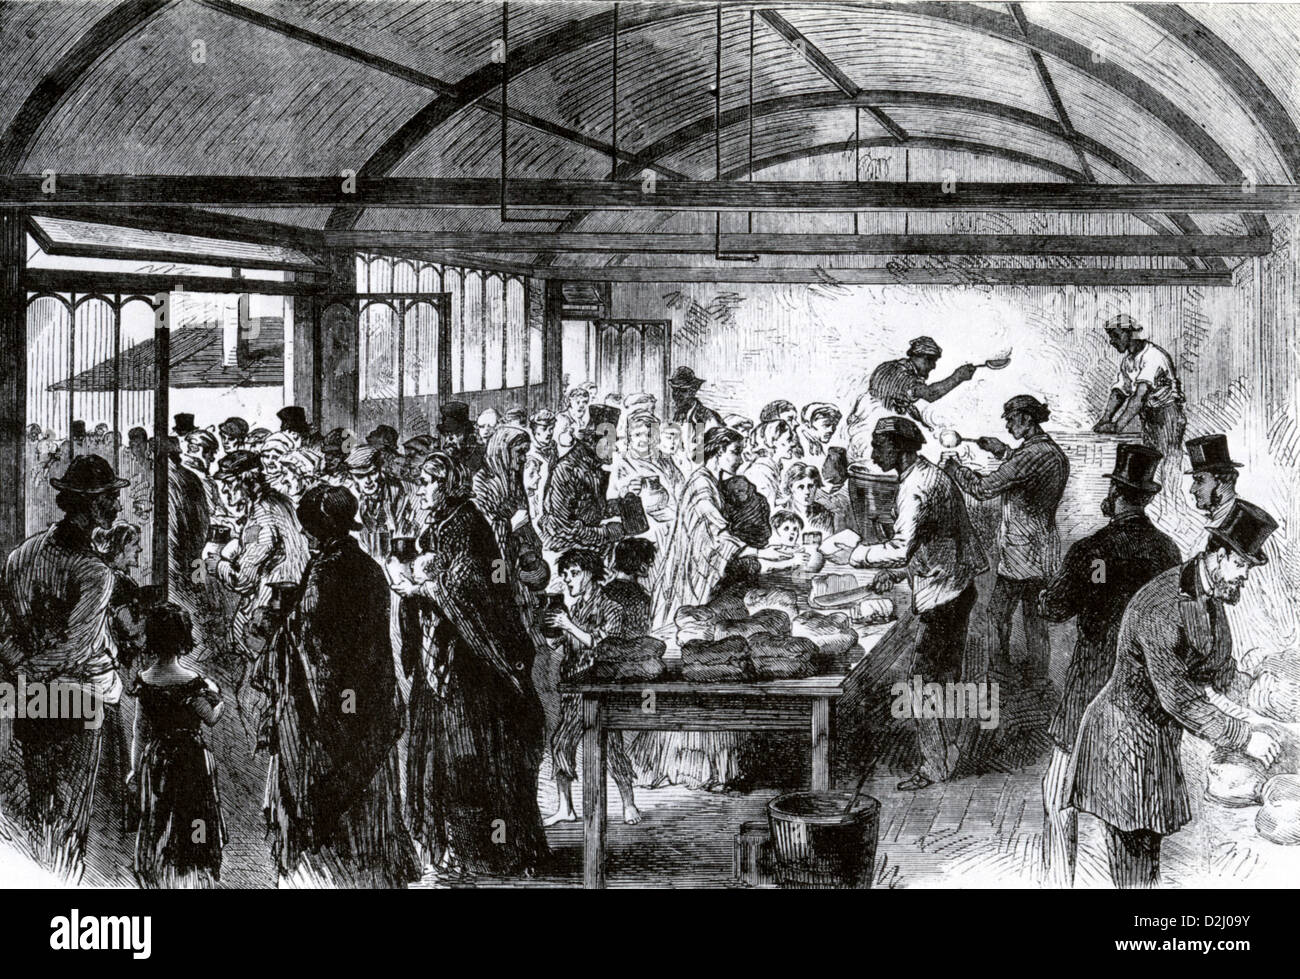 VICTORIAN SOUP KITCHEN Food distribution at the Strangers' Home, West India Dock Road, Limehouse, London in 1868 Stock Photo